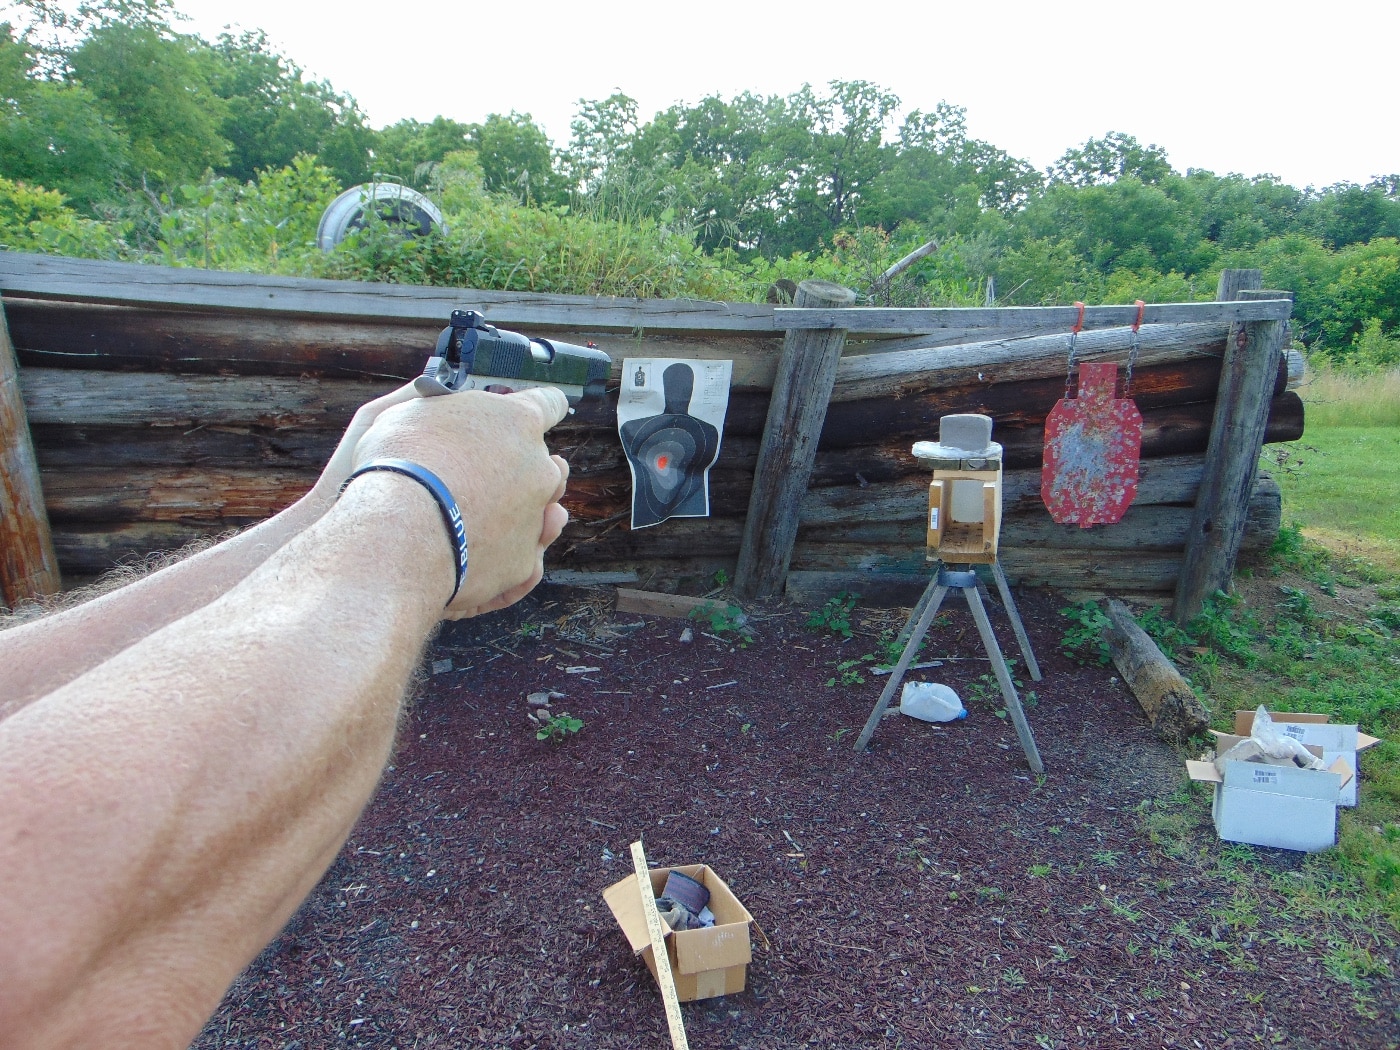 shooting 10mm into clay for testing